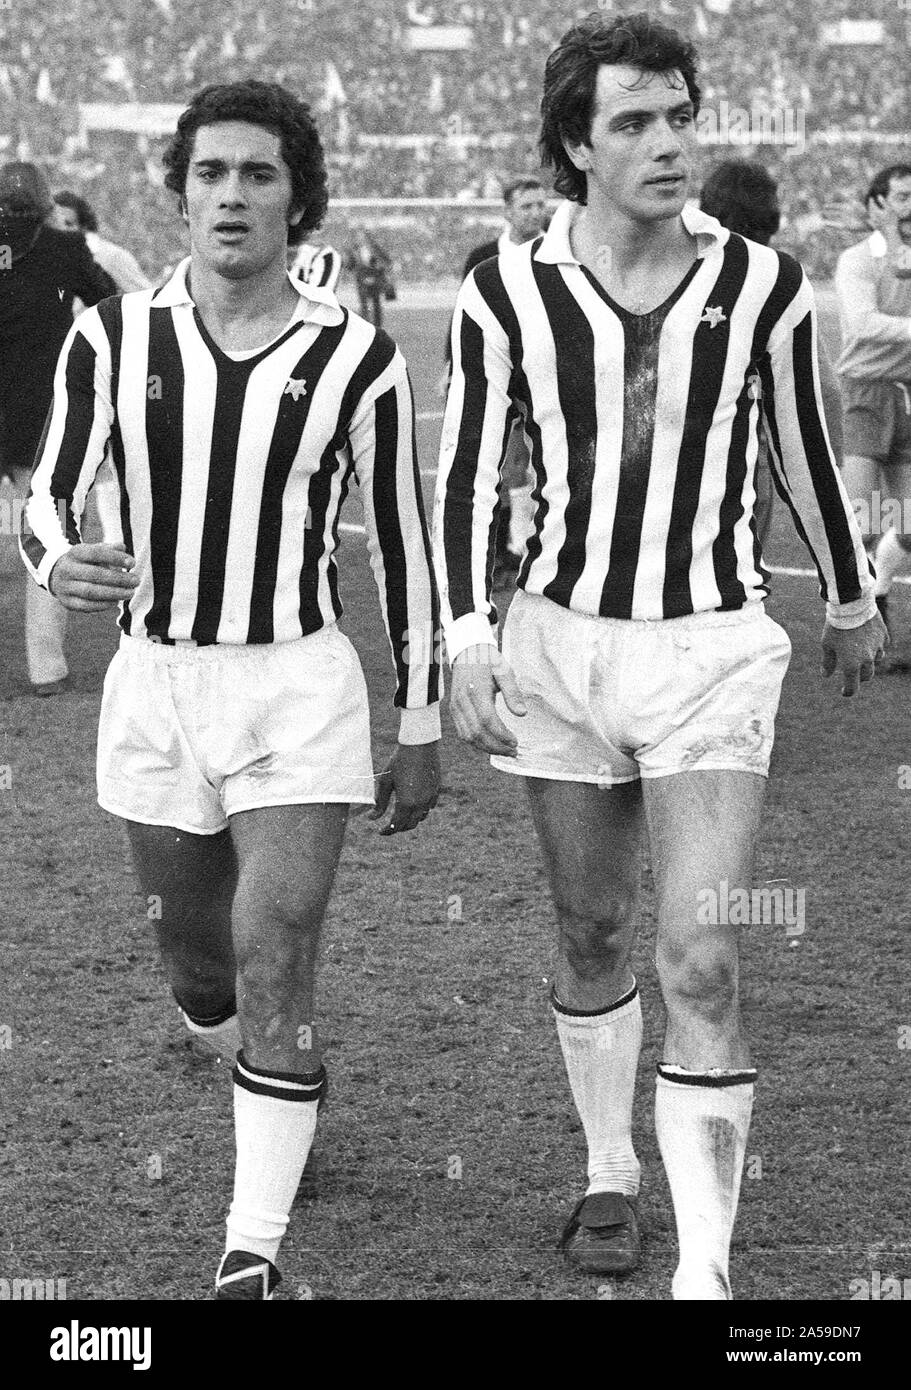 Rome, Olympic Stadium, January 5, 1975. From left: Juventus players, Claudio Gentile and Roberto Bettega, come out of the field at the end of the lost away match at Lazio (0-1) and valid for the 12th day of the Italian championship of Serie A 1974-75. Stock Photo